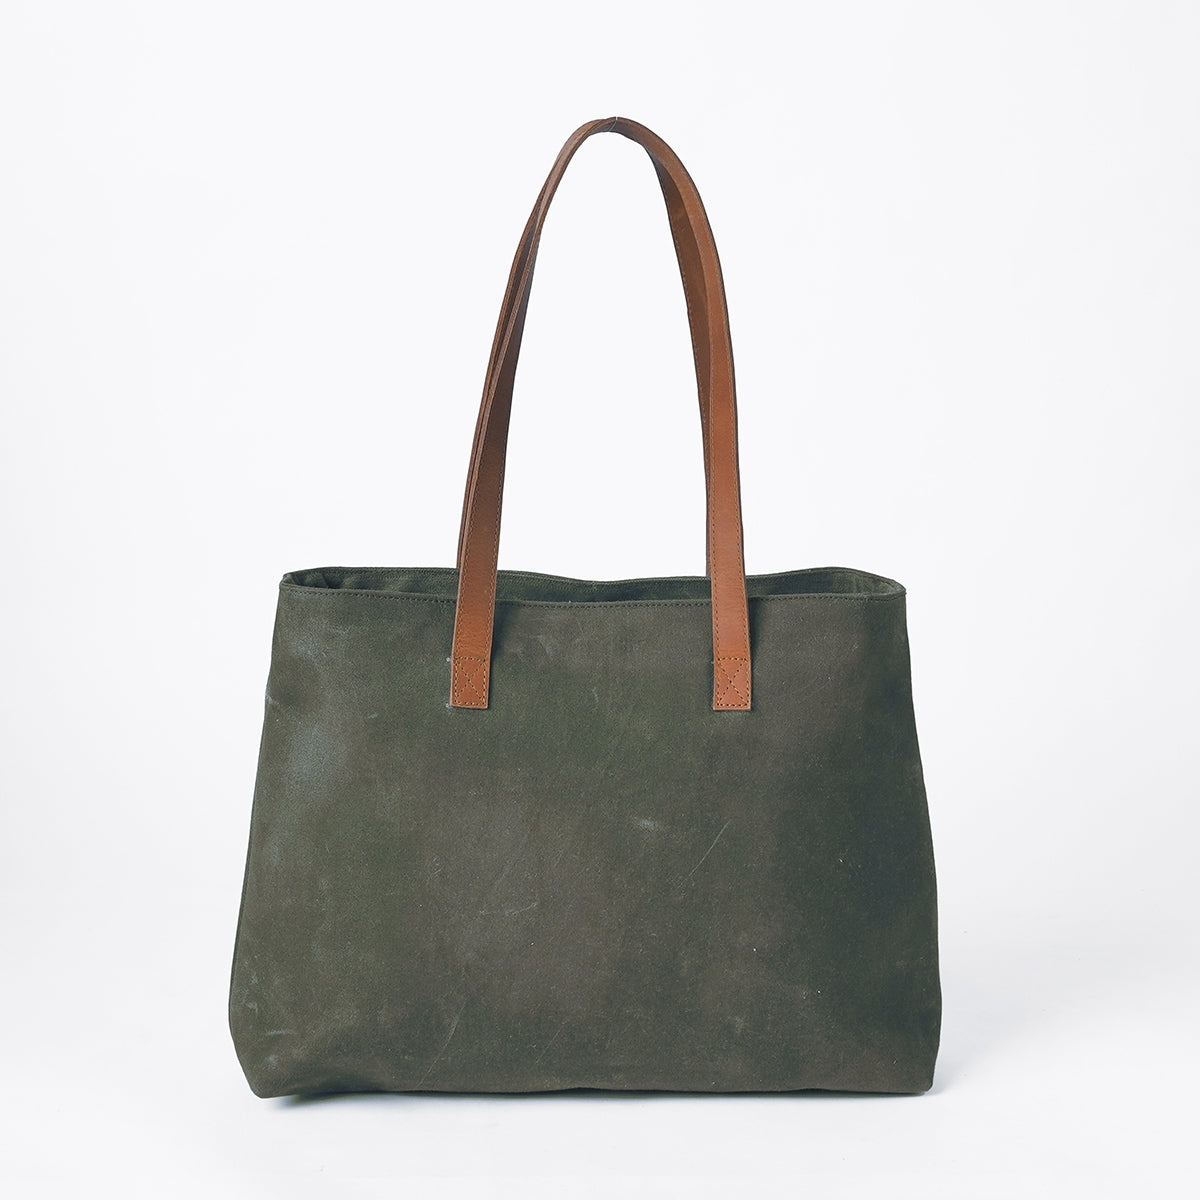 Olive Green waxed canvas yoga bag, gym bag, leather adjustable straps, 16X13X4 inches